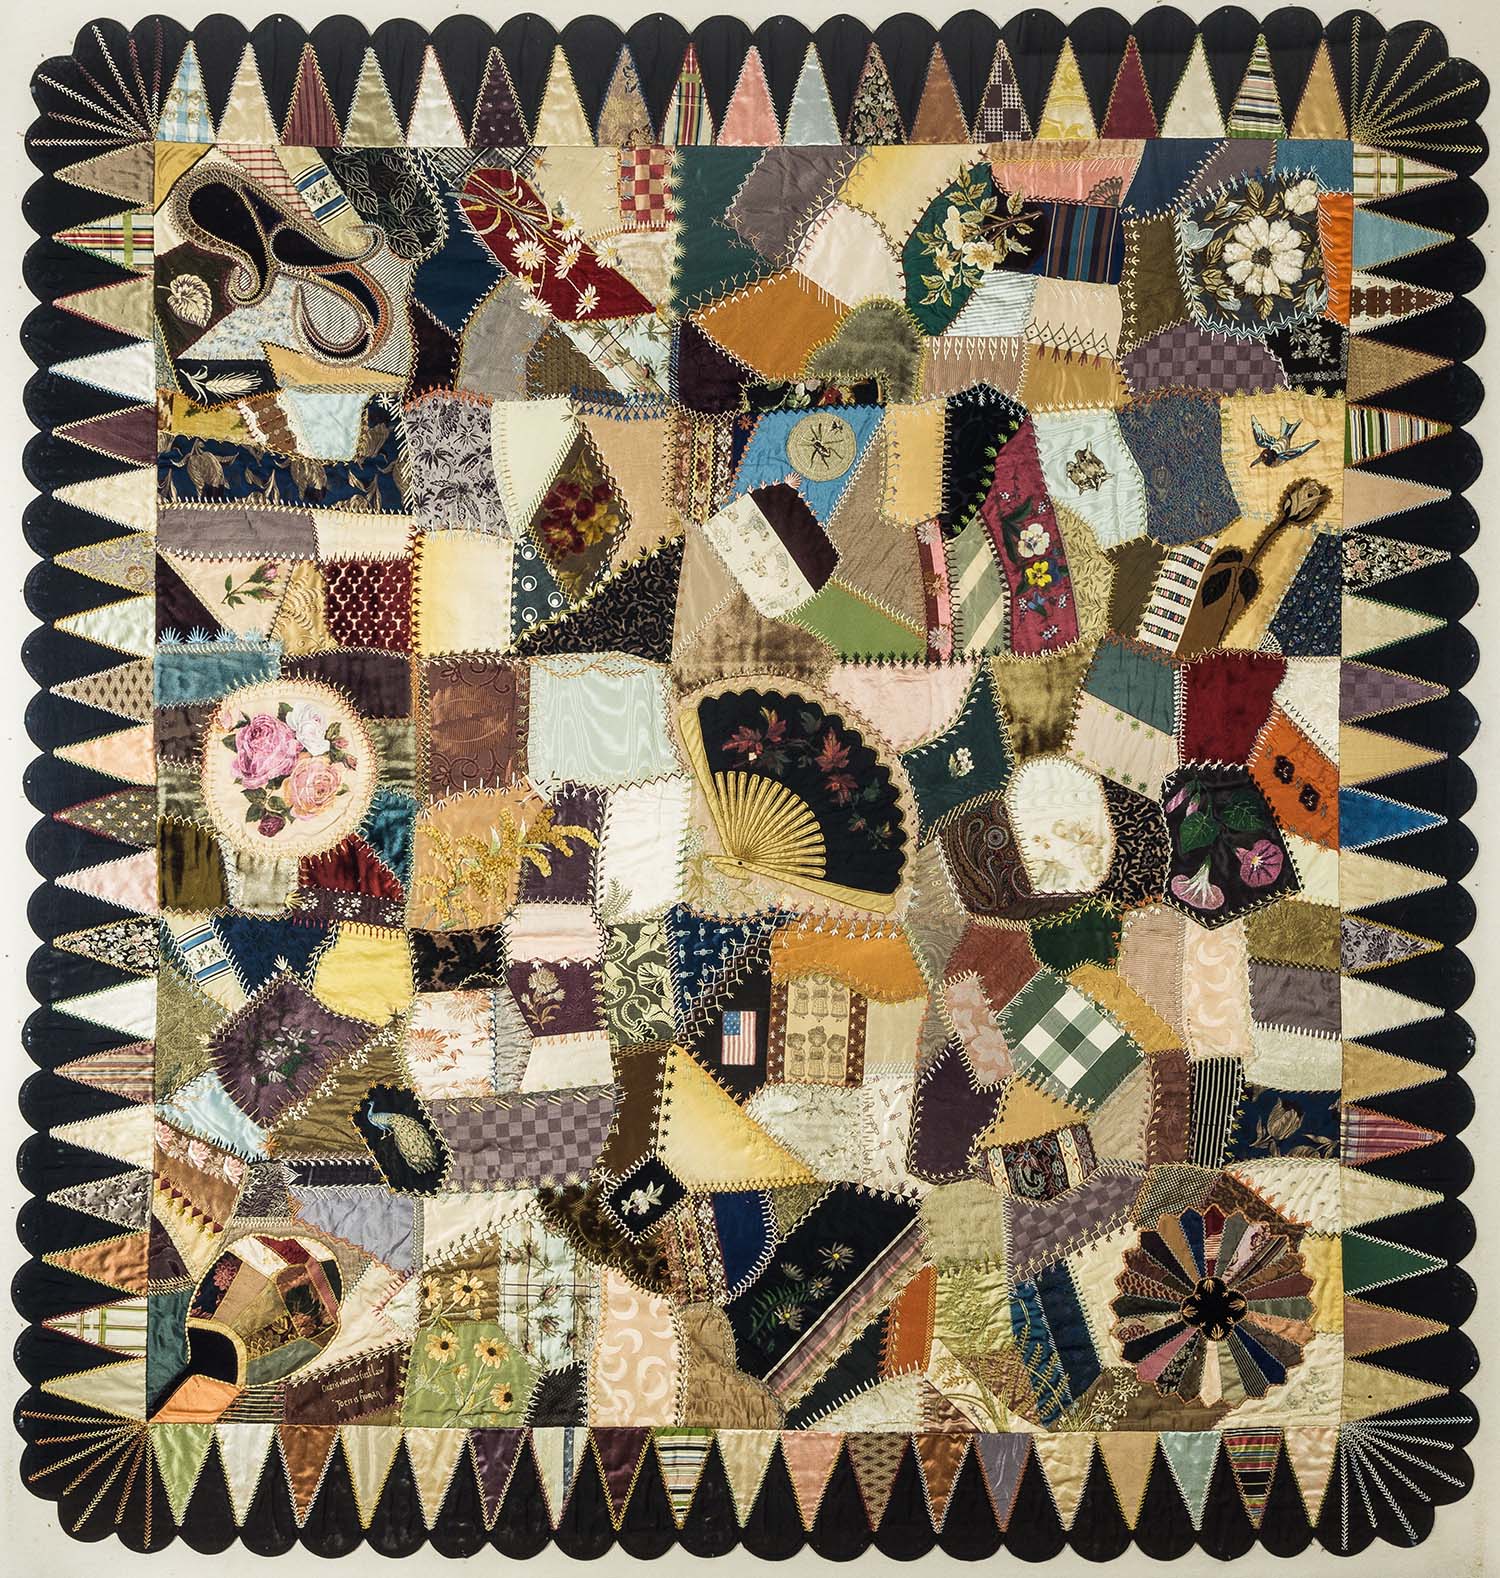 photo of crazy quilt from Burgwin-Wright House collection